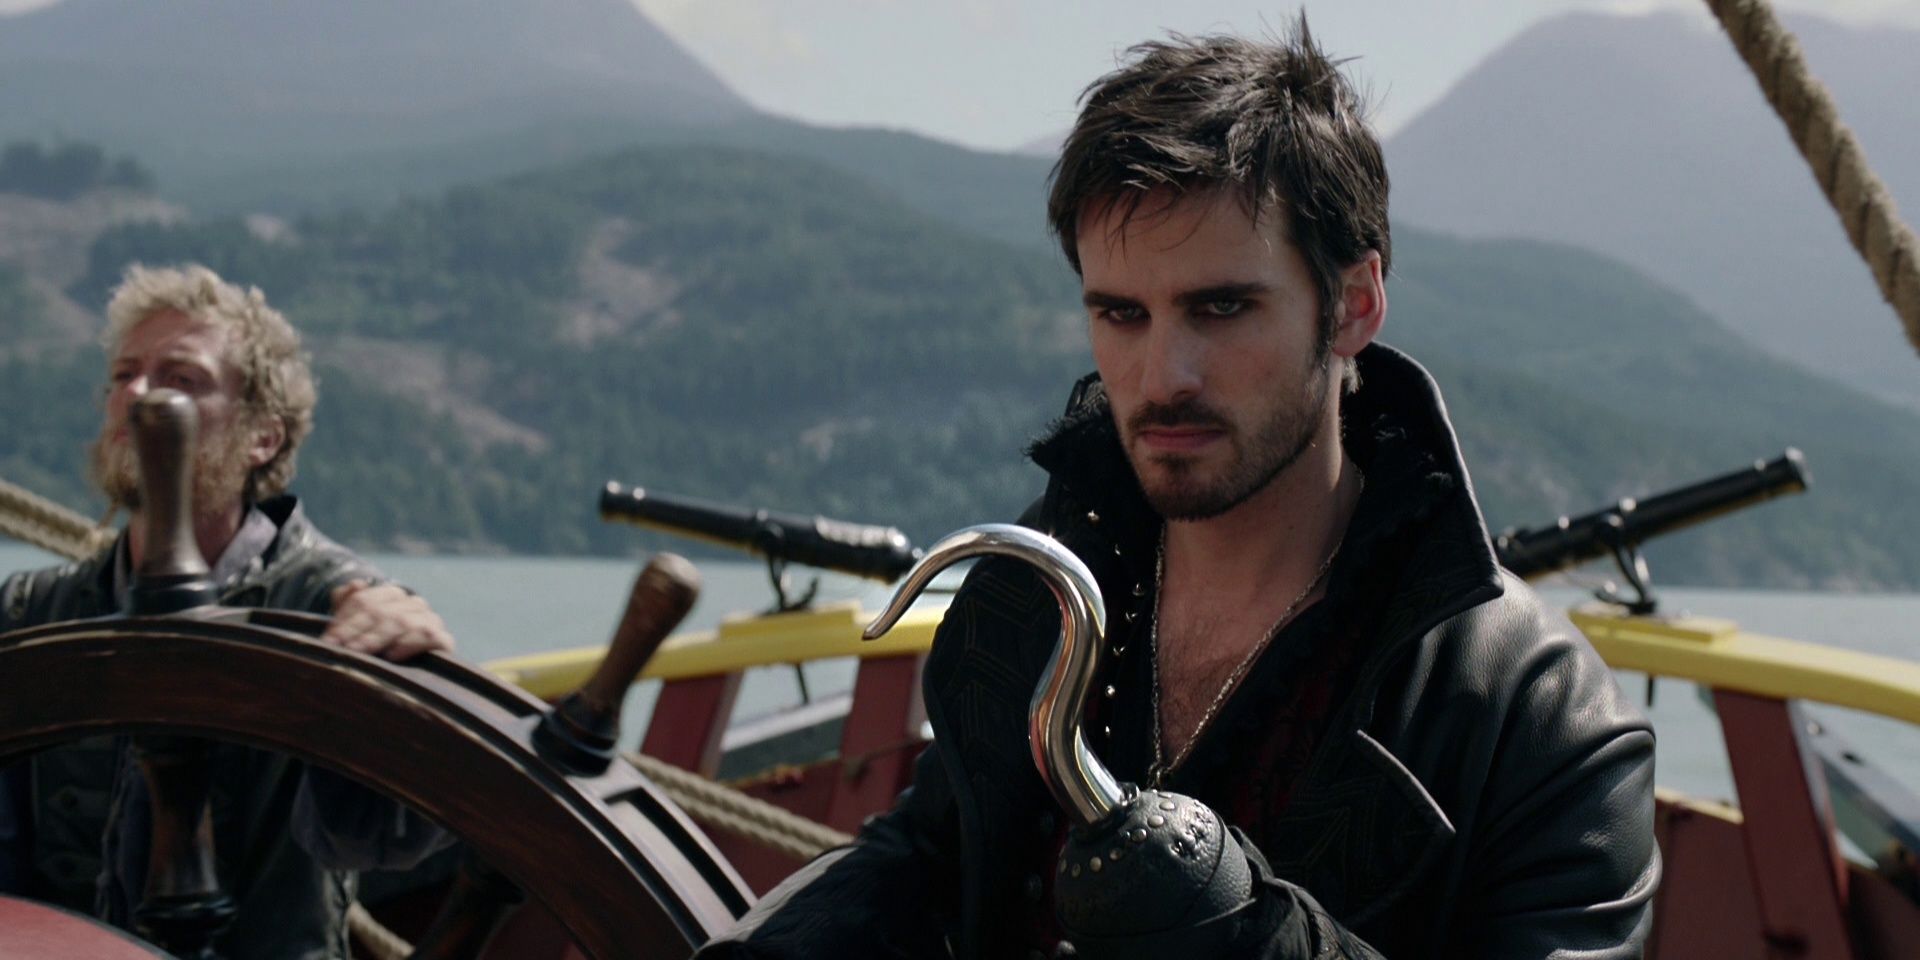 https://static1.srcdn.com/wordpress/wp-content/uploads/2019/11/Once-Upon-A-Time-5-Times-Captain-Hook-Was-A-Hero-5-Times-He-Was-A-Villain-Heading-Cropped.jpg